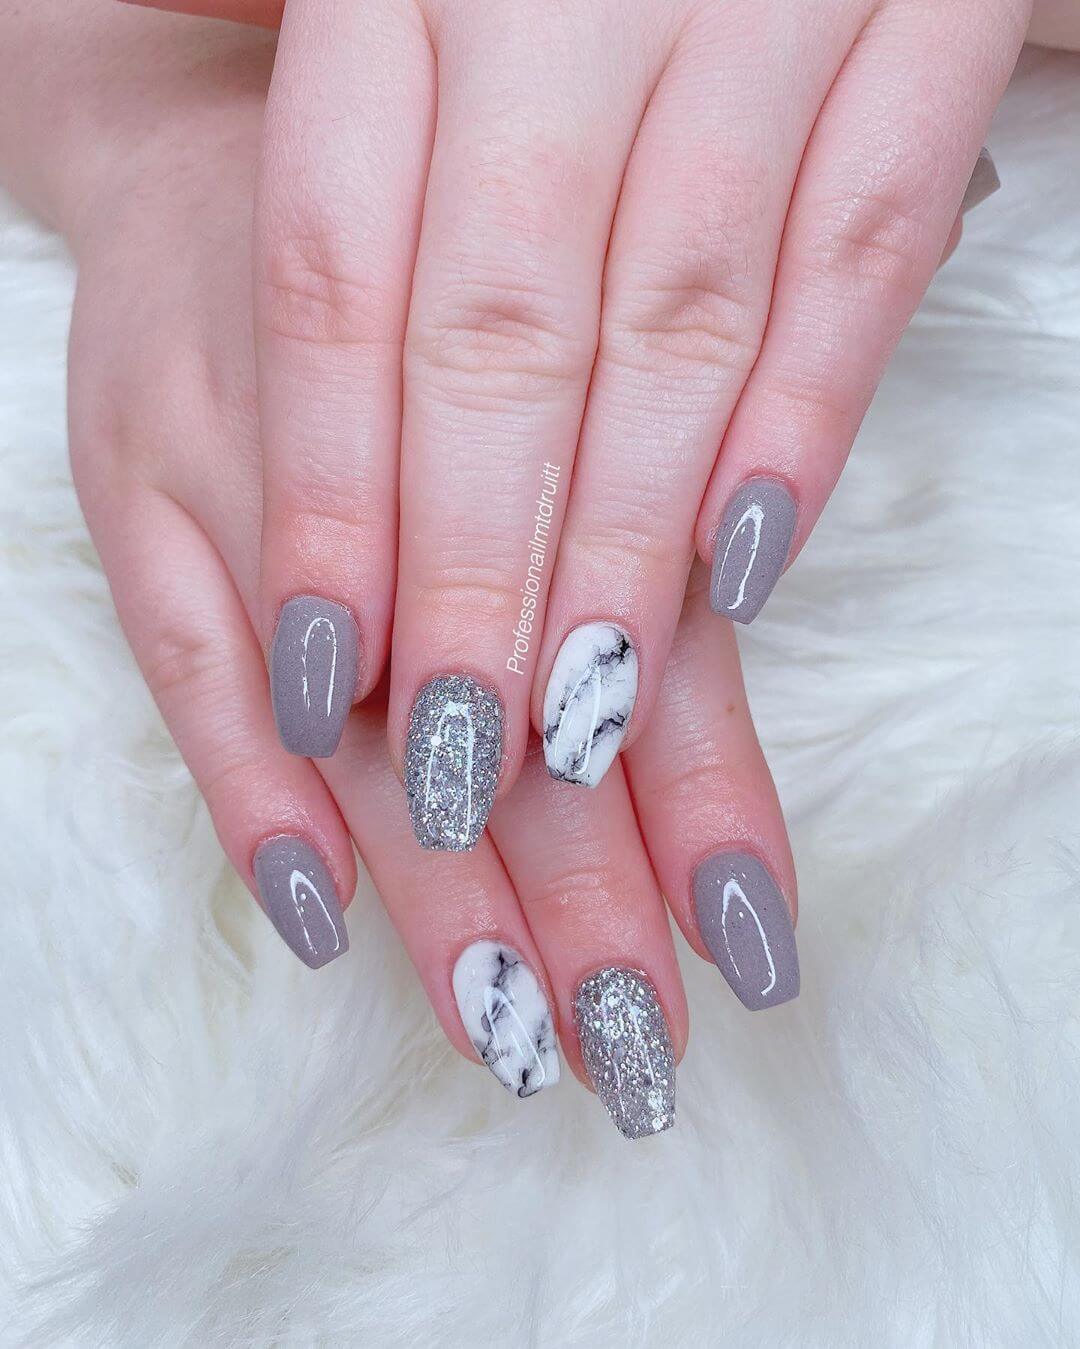 Marble Nail Art Designs & Ideas to Upgrade Your Manicure - K4 Fashion